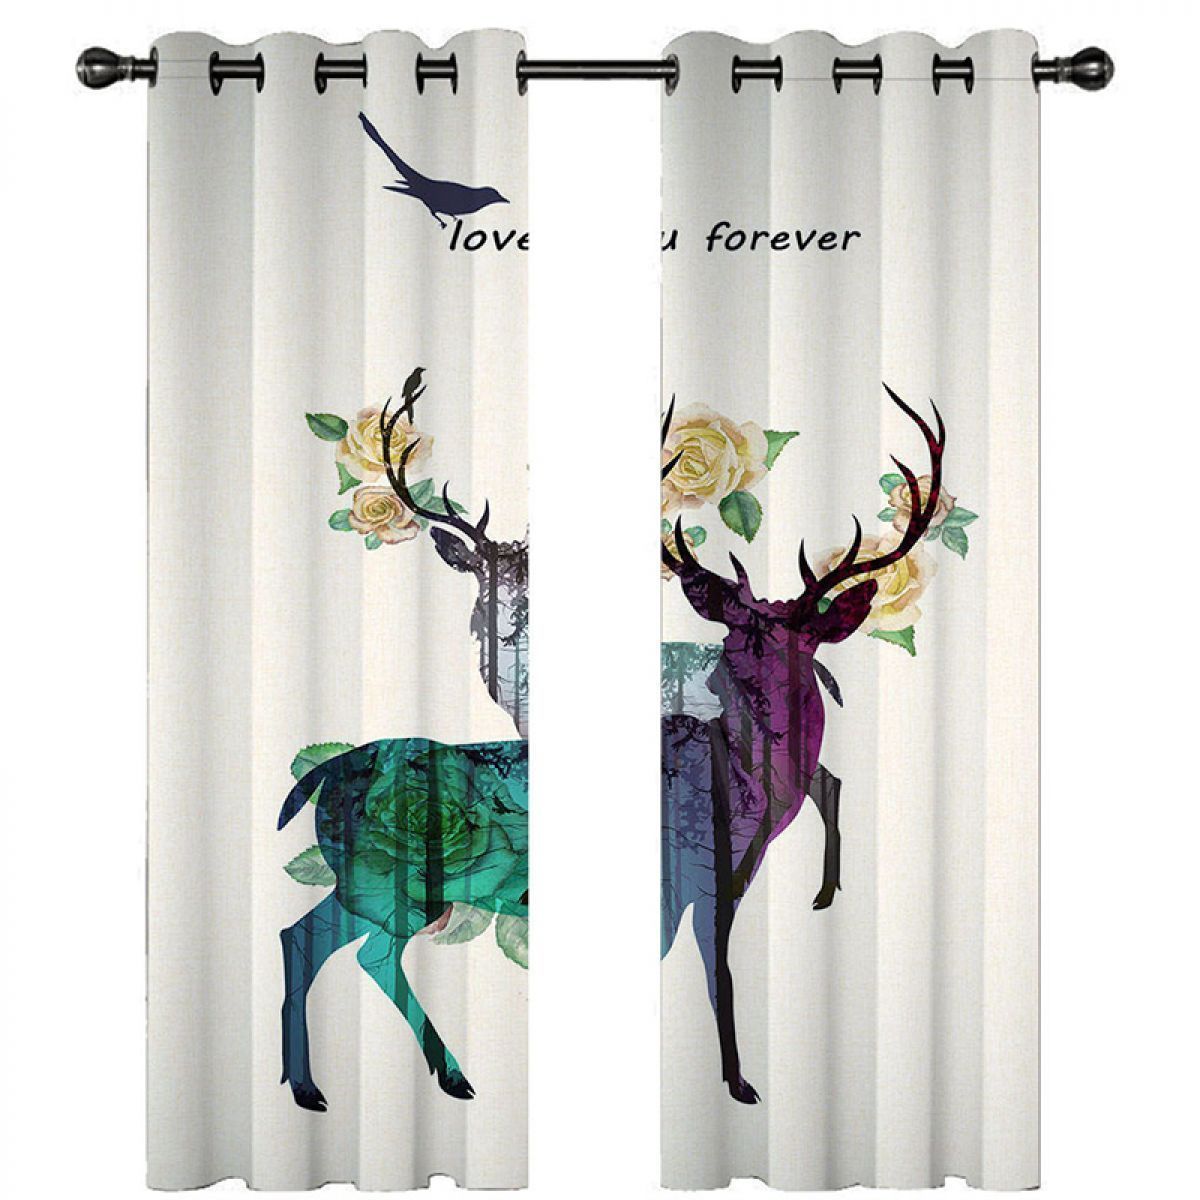 Sika Deer Love You Forever Printed Window Curtain Home Decor